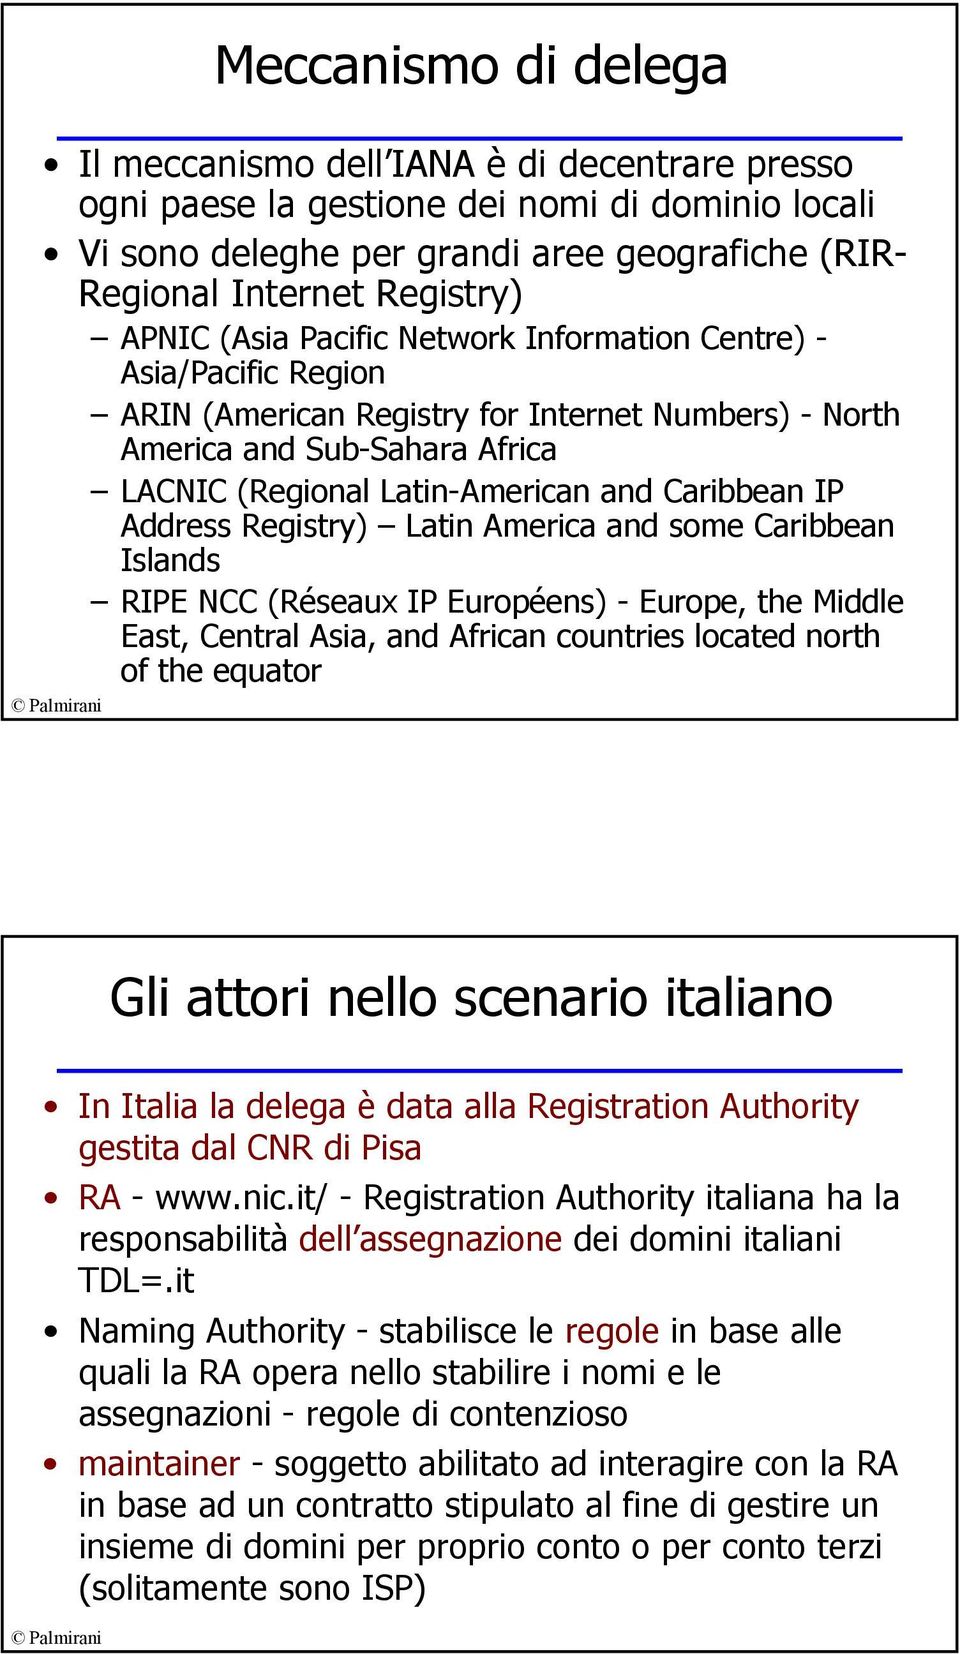 IP Address Registry) Latin America and some Caribbean Islands RIPE NCC (Réseaux IP Européens) - Europe, the Middle East, Central Asia, and African countries located north of the equator Gli attori